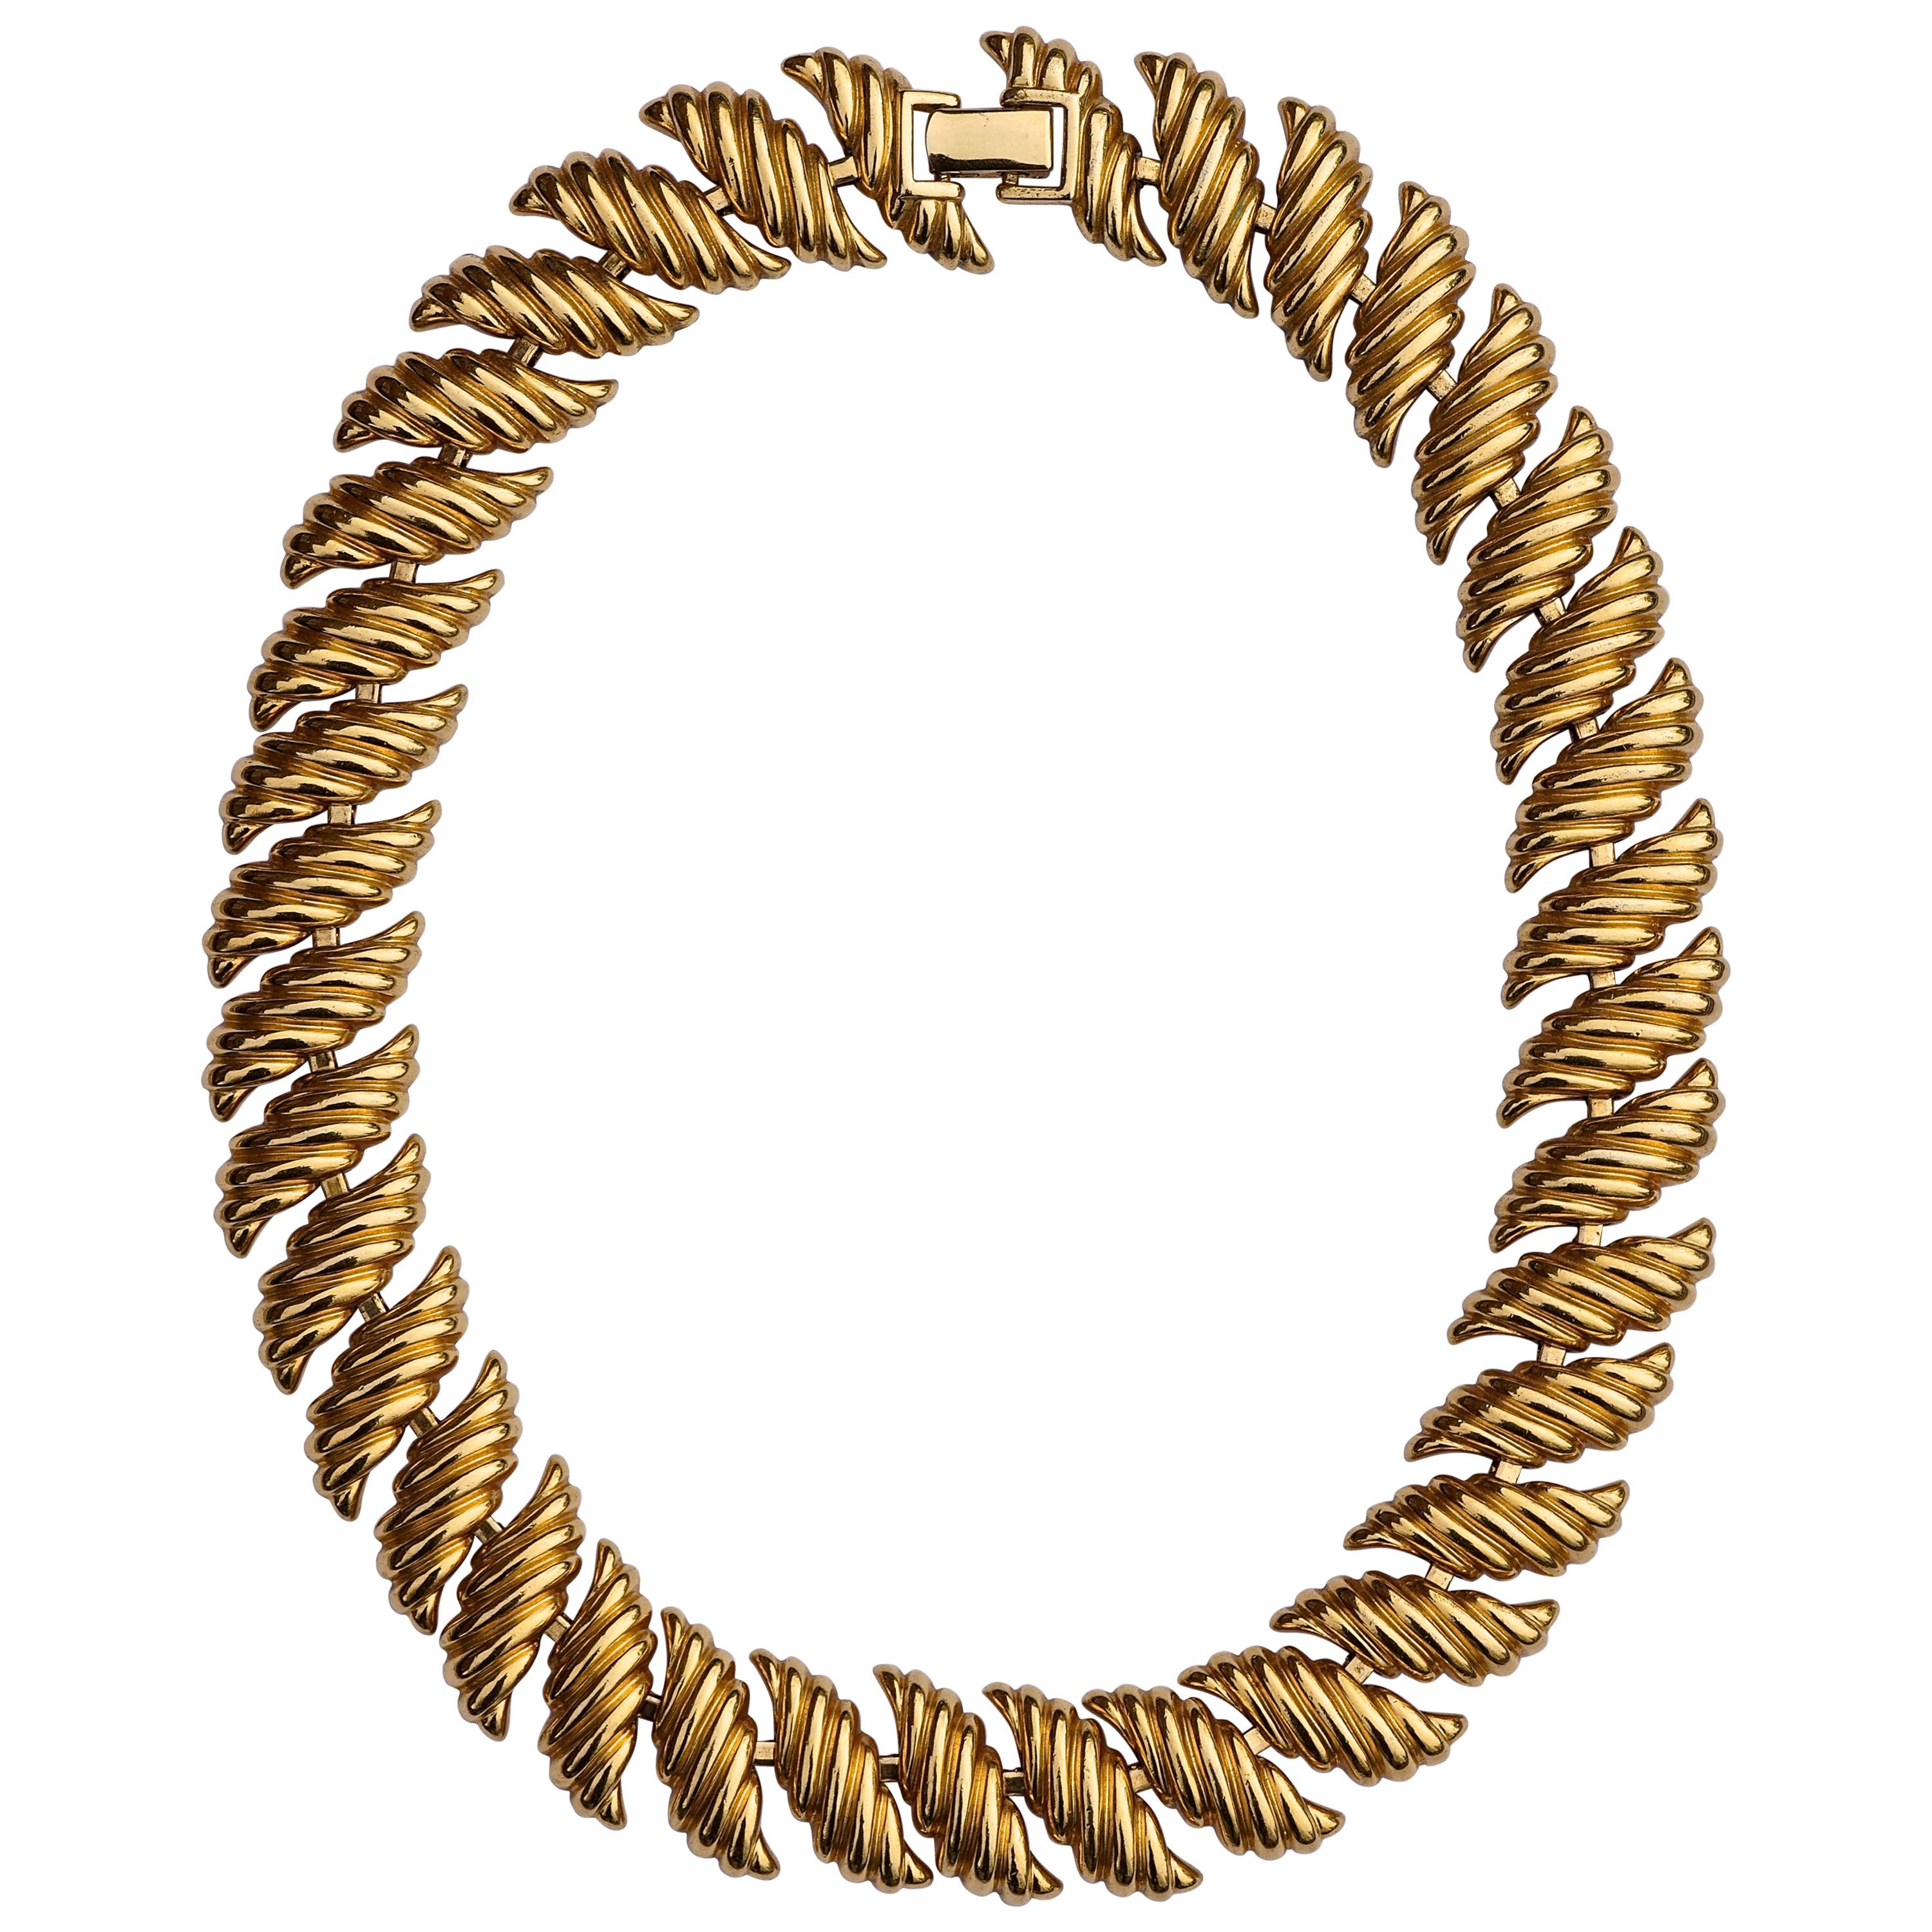 Napier Gold Plated Shiny Ridged Detail Link Statement Necklace circa 1980s